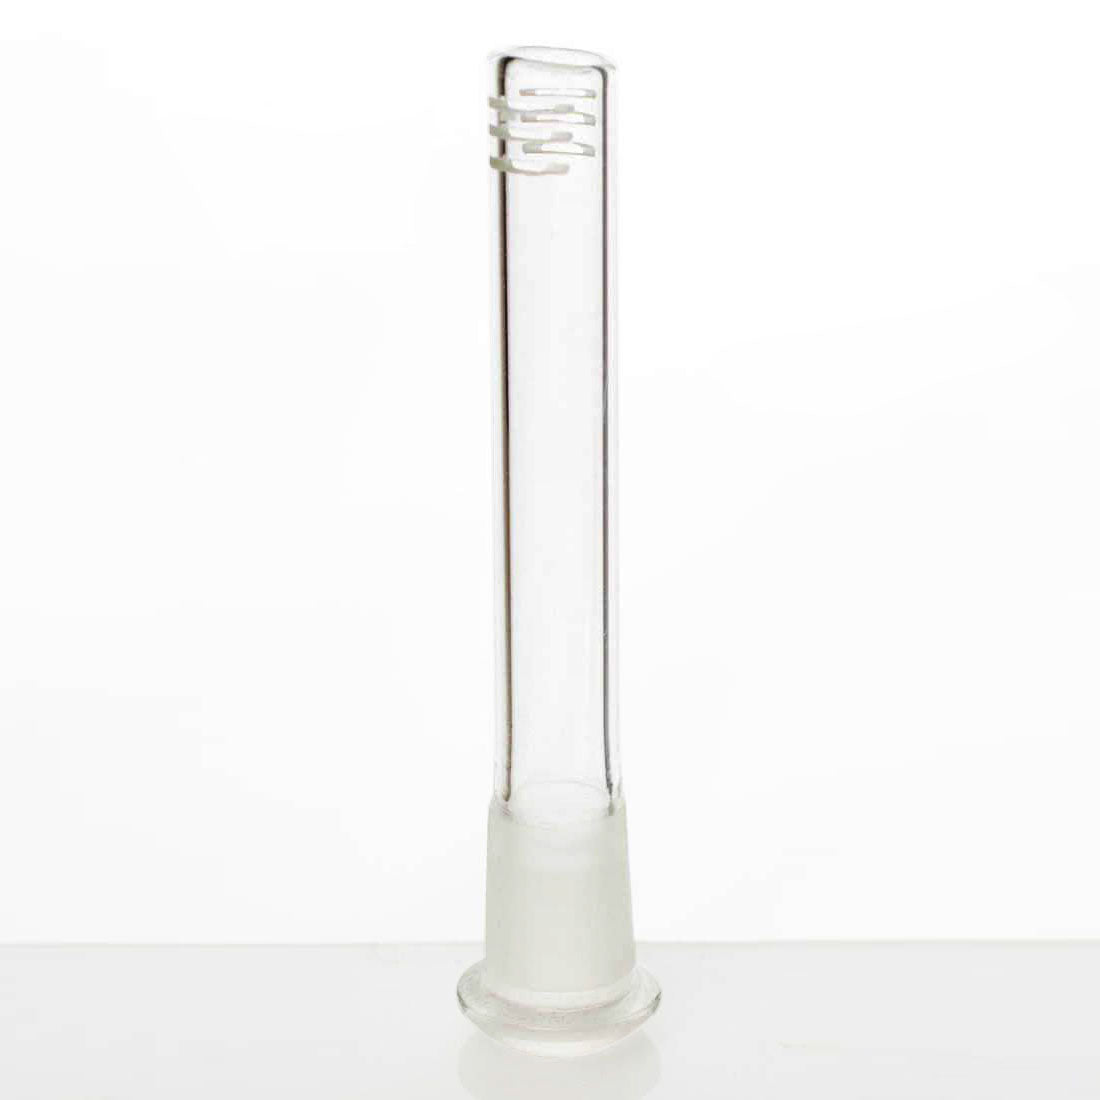 HELIX 3-in-1 Glass Pipe Set - INHALCO